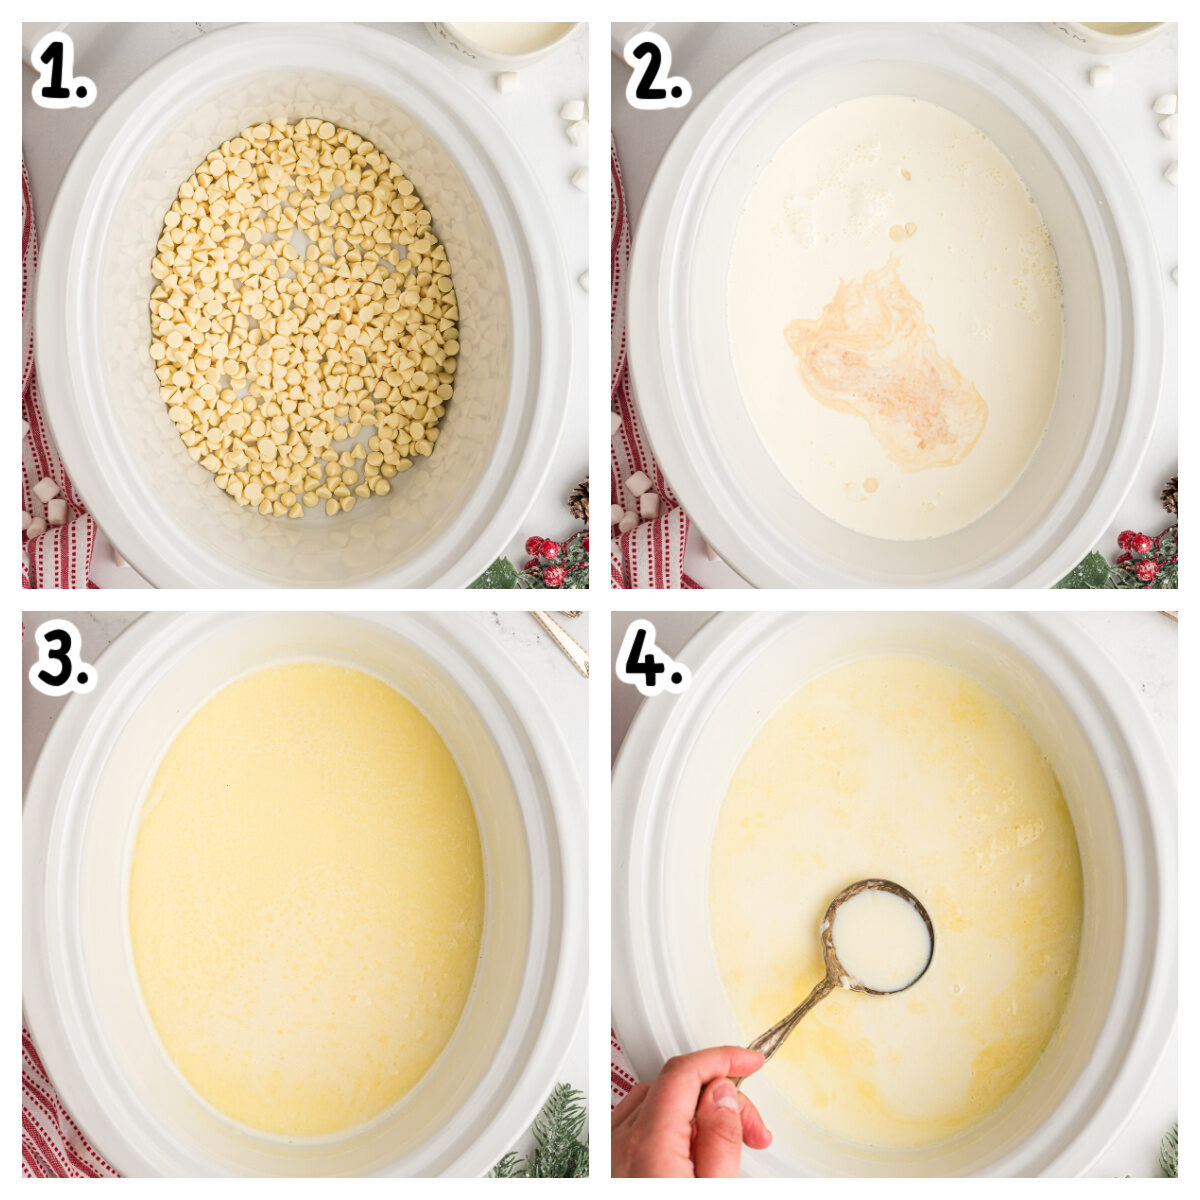 4 images showing how to make white hot chocolate in a slow cooker.